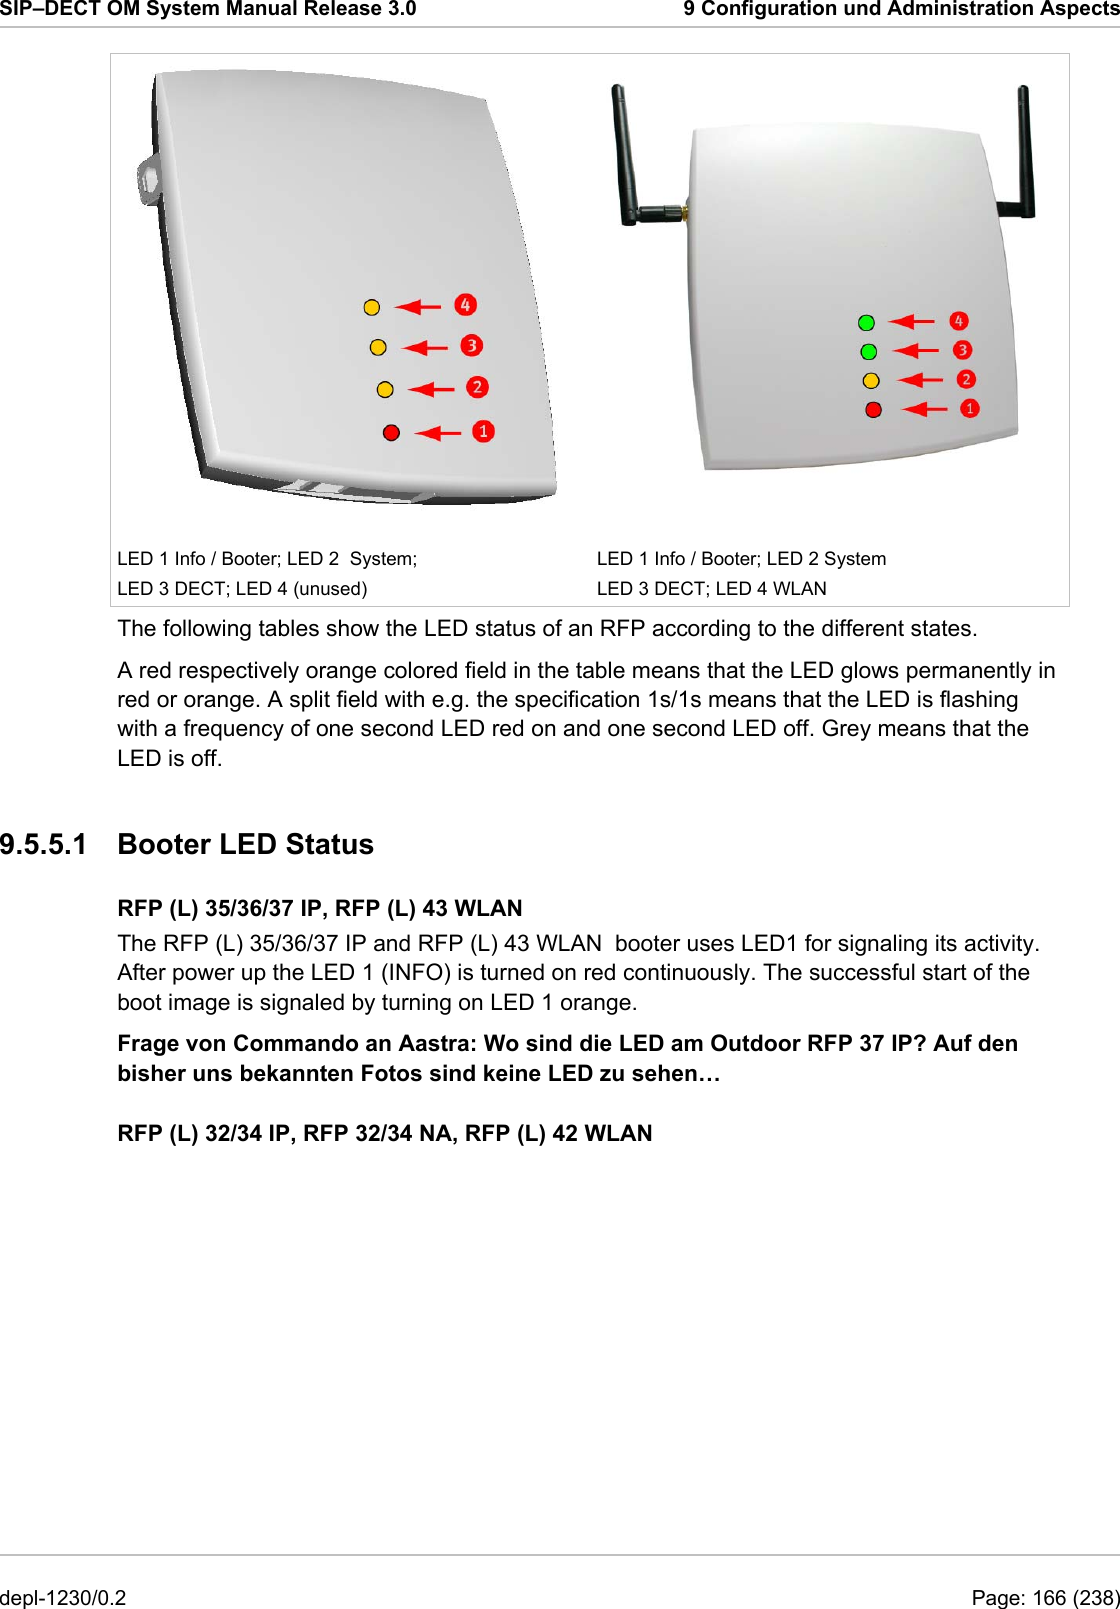 SIP–DECT OM System Manual Release 3.0  9 Configuration und Administration Aspects LED 1 Info / Booter; LED 2  System;  LED 3 DECT; LED 4 (unused) LED 1 Info / Booter; LED 2 System LED 3 DECT; LED 4 WLAN The following tables show the LED status of an RFP according to the different states. A red respectively orange colored field in the table means that the LED glows permanently in red or orange. A split field with e.g. the specification 1s/1s means that the LED is flashing with a frequency of one second LED red on and one second LED off. Grey means that the LED is off. 9.5.5.1 Booter LED Status RFP (L) 35/36/37 IP, RFP (L) 43 WLAN The RFP (L) 35/36/37 IP and RFP (L) 43 WLAN  booter uses LED1 for signaling its activity. After power up the LED 1 (INFO) is turned on red continuously. The successful start of the boot image is signaled by turning on LED 1 orange. Frage von Commando an Aastra: Wo sind die LED am Outdoor RFP 37 IP? Auf den bisher uns bekannten Fotos sind keine LED zu sehen… RFP (L) 32/34 IP, RFP 32/34 NA, RFP (L) 42 WLAN depl-1230/0.2  Page: 166 (238) 